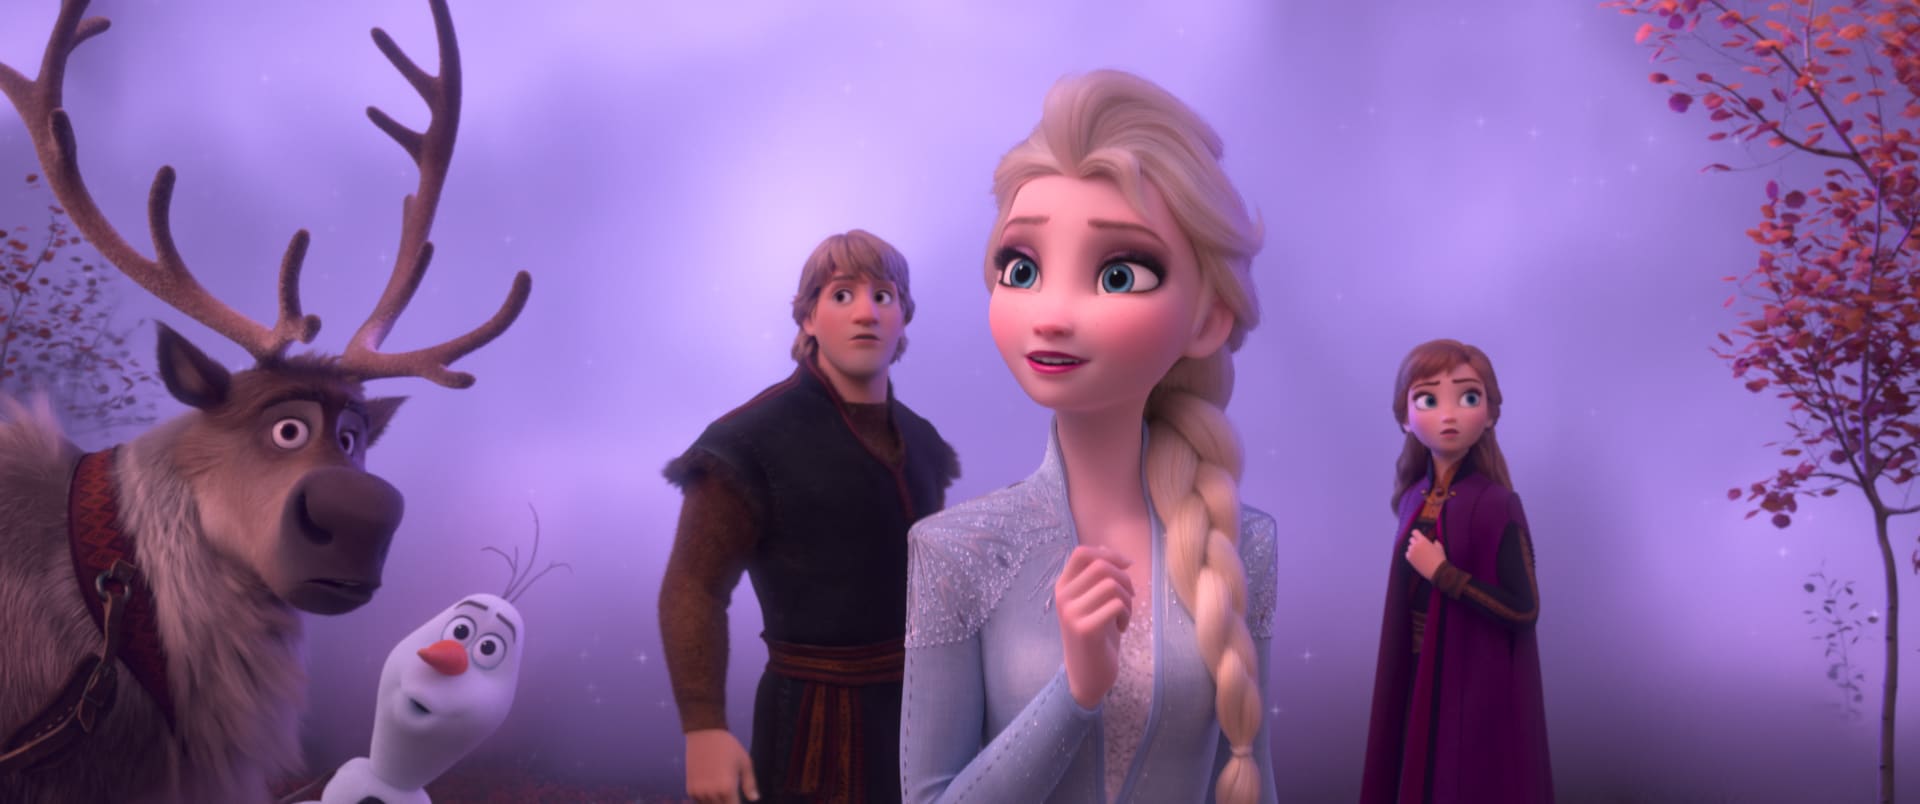 Frozen 2': The 20 Best Quotes from the Disney Animated Blockbuster Sequel